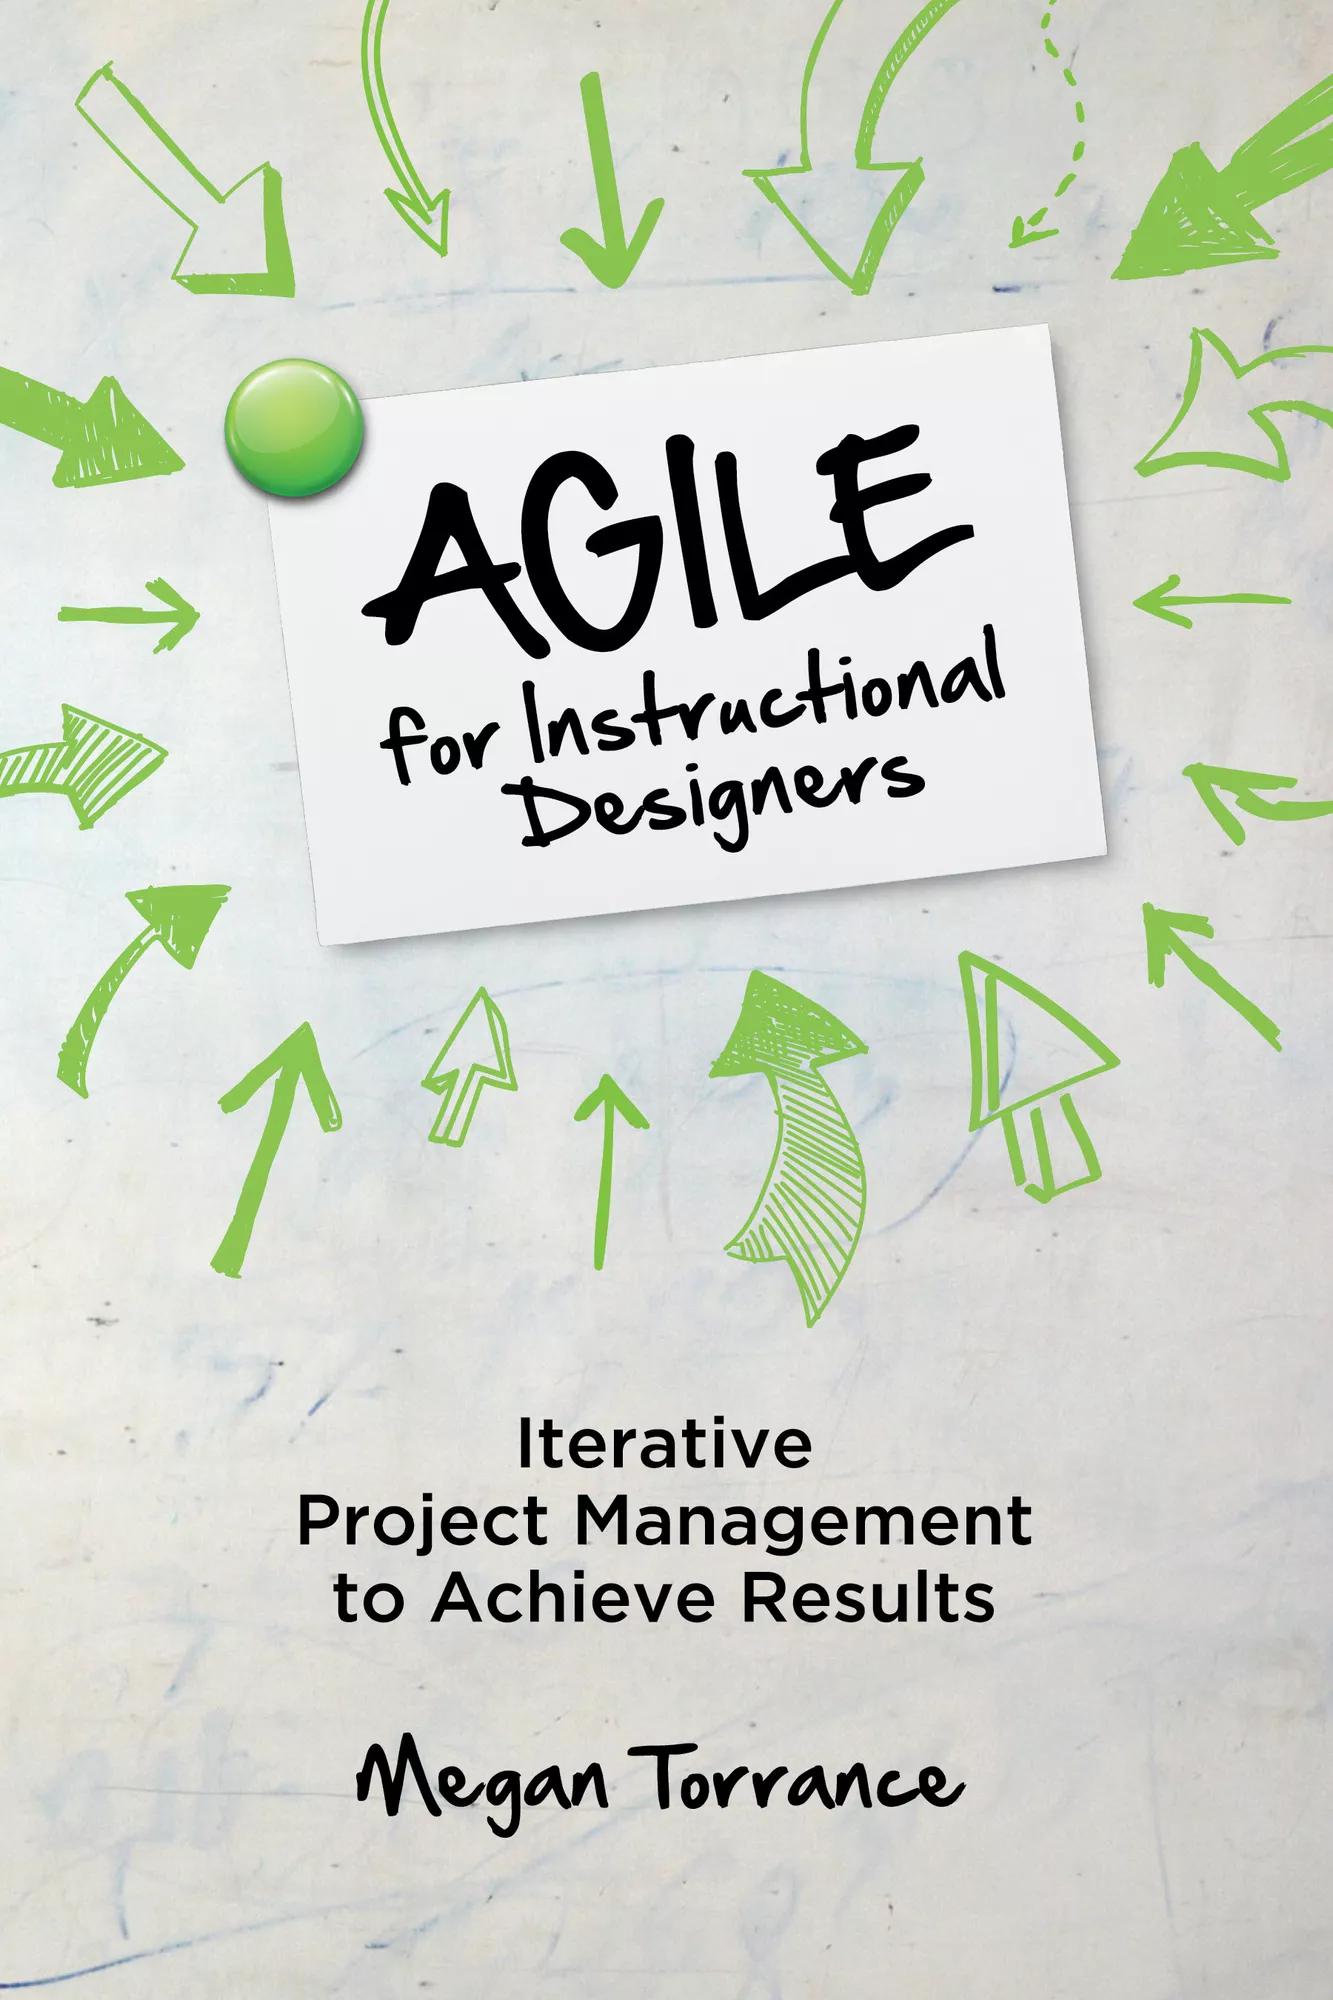 111910_Agile for Instructional Designers_RGB